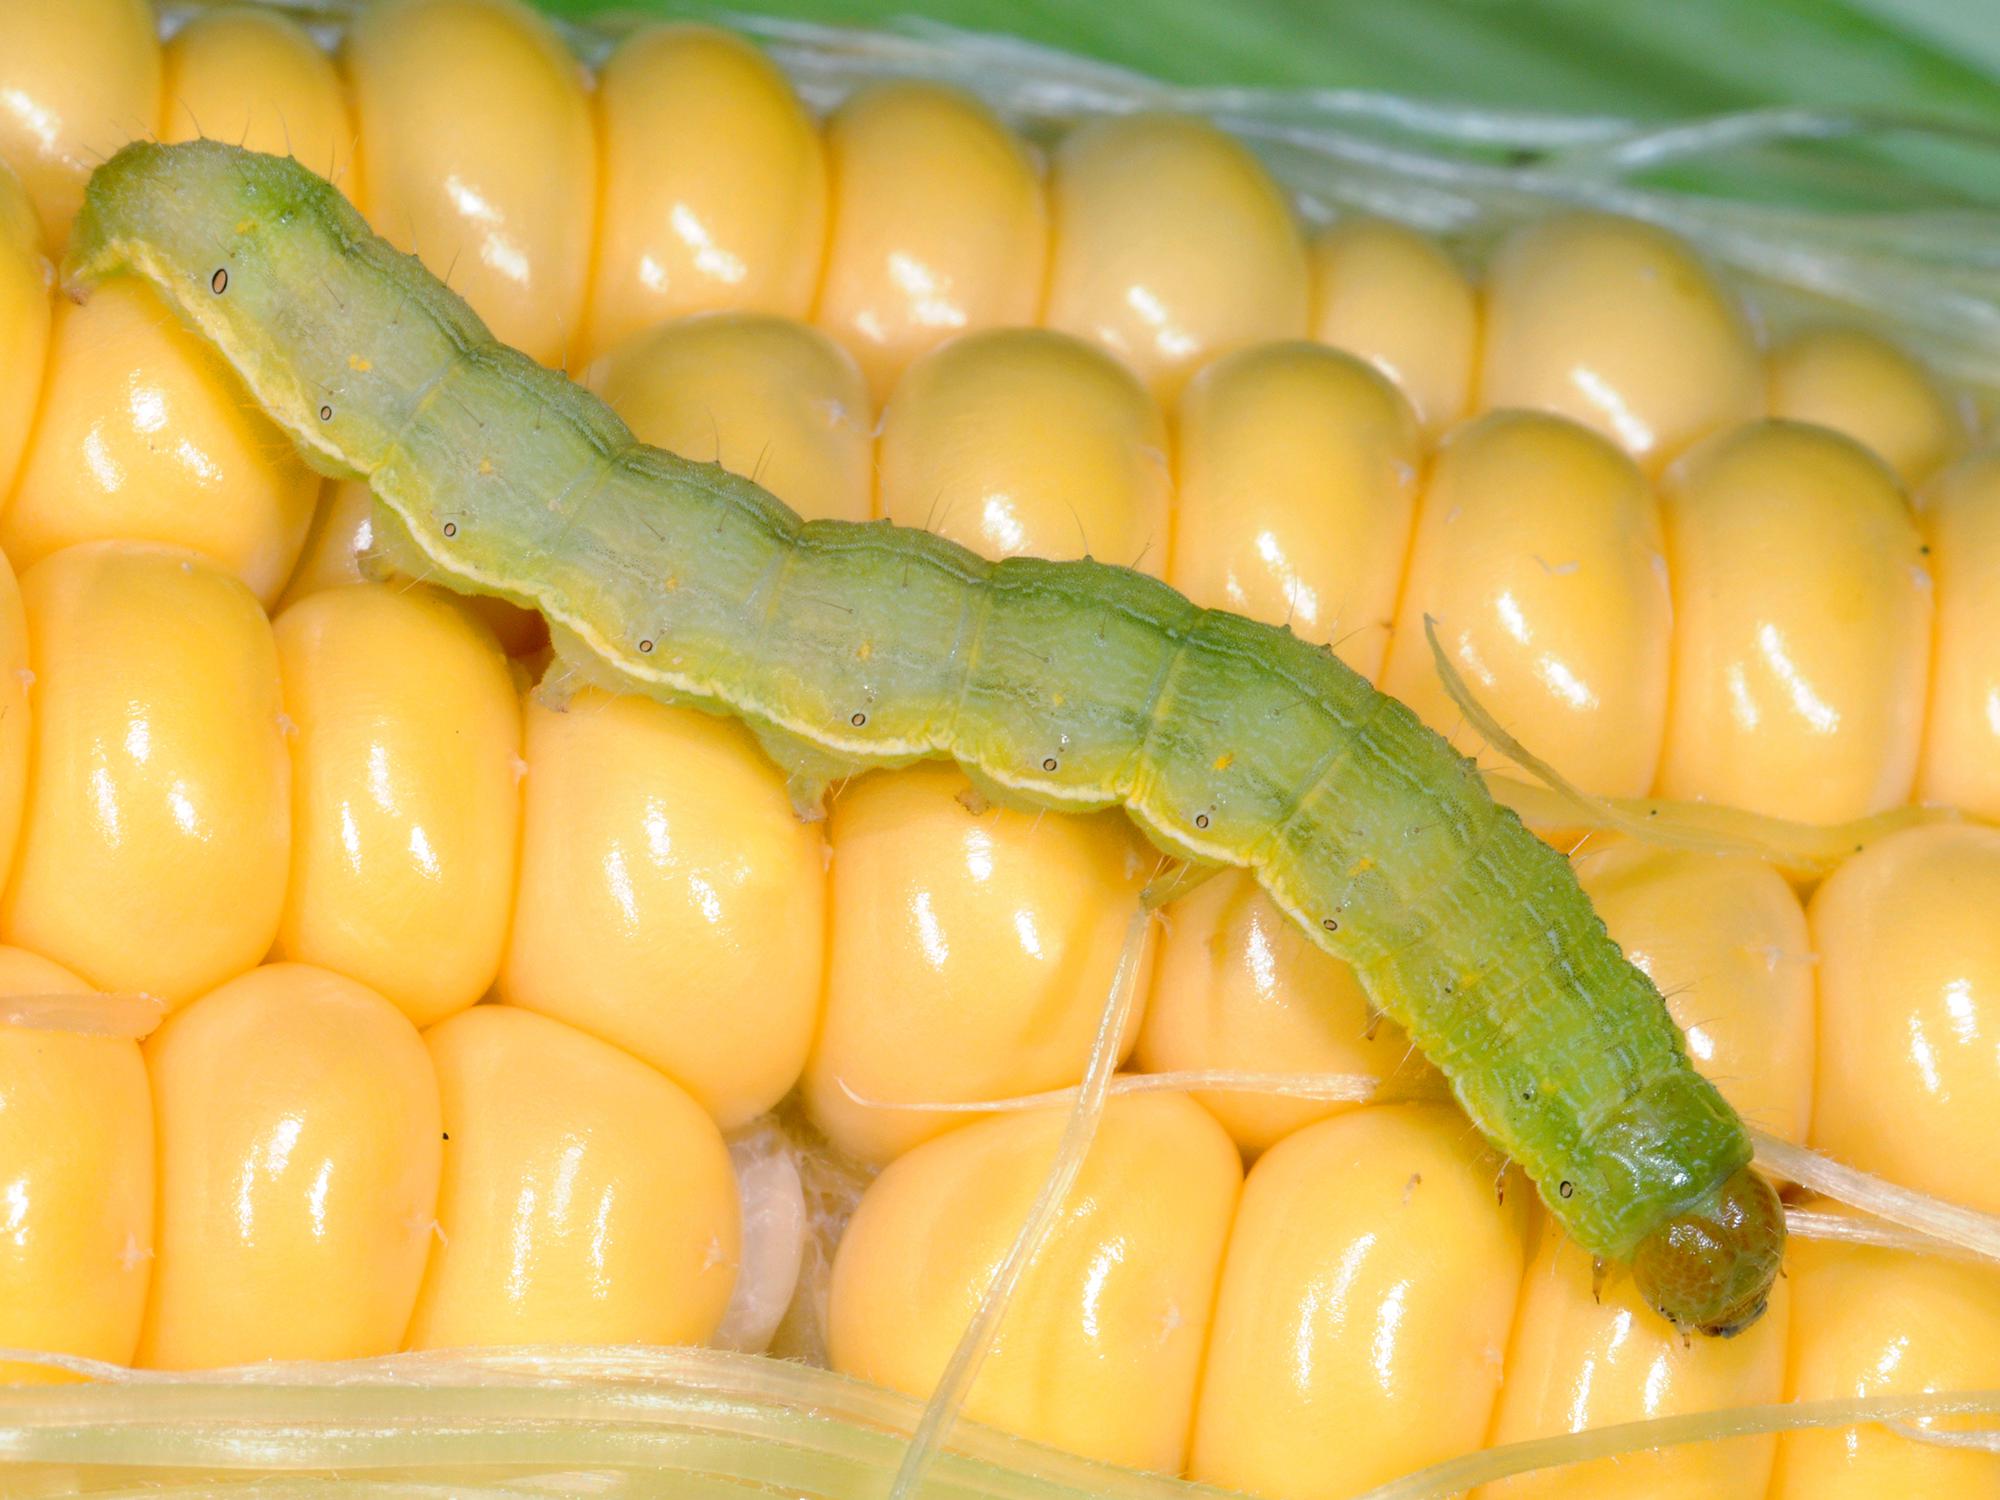 The larvae of tomato fruitworms, also known as corn earworms and cotton bollworms, are robust caterpillars an inch or more long. Body color varies greatly, depending on what they eat. (Photo by MSU Extension Service/Blake Layton)